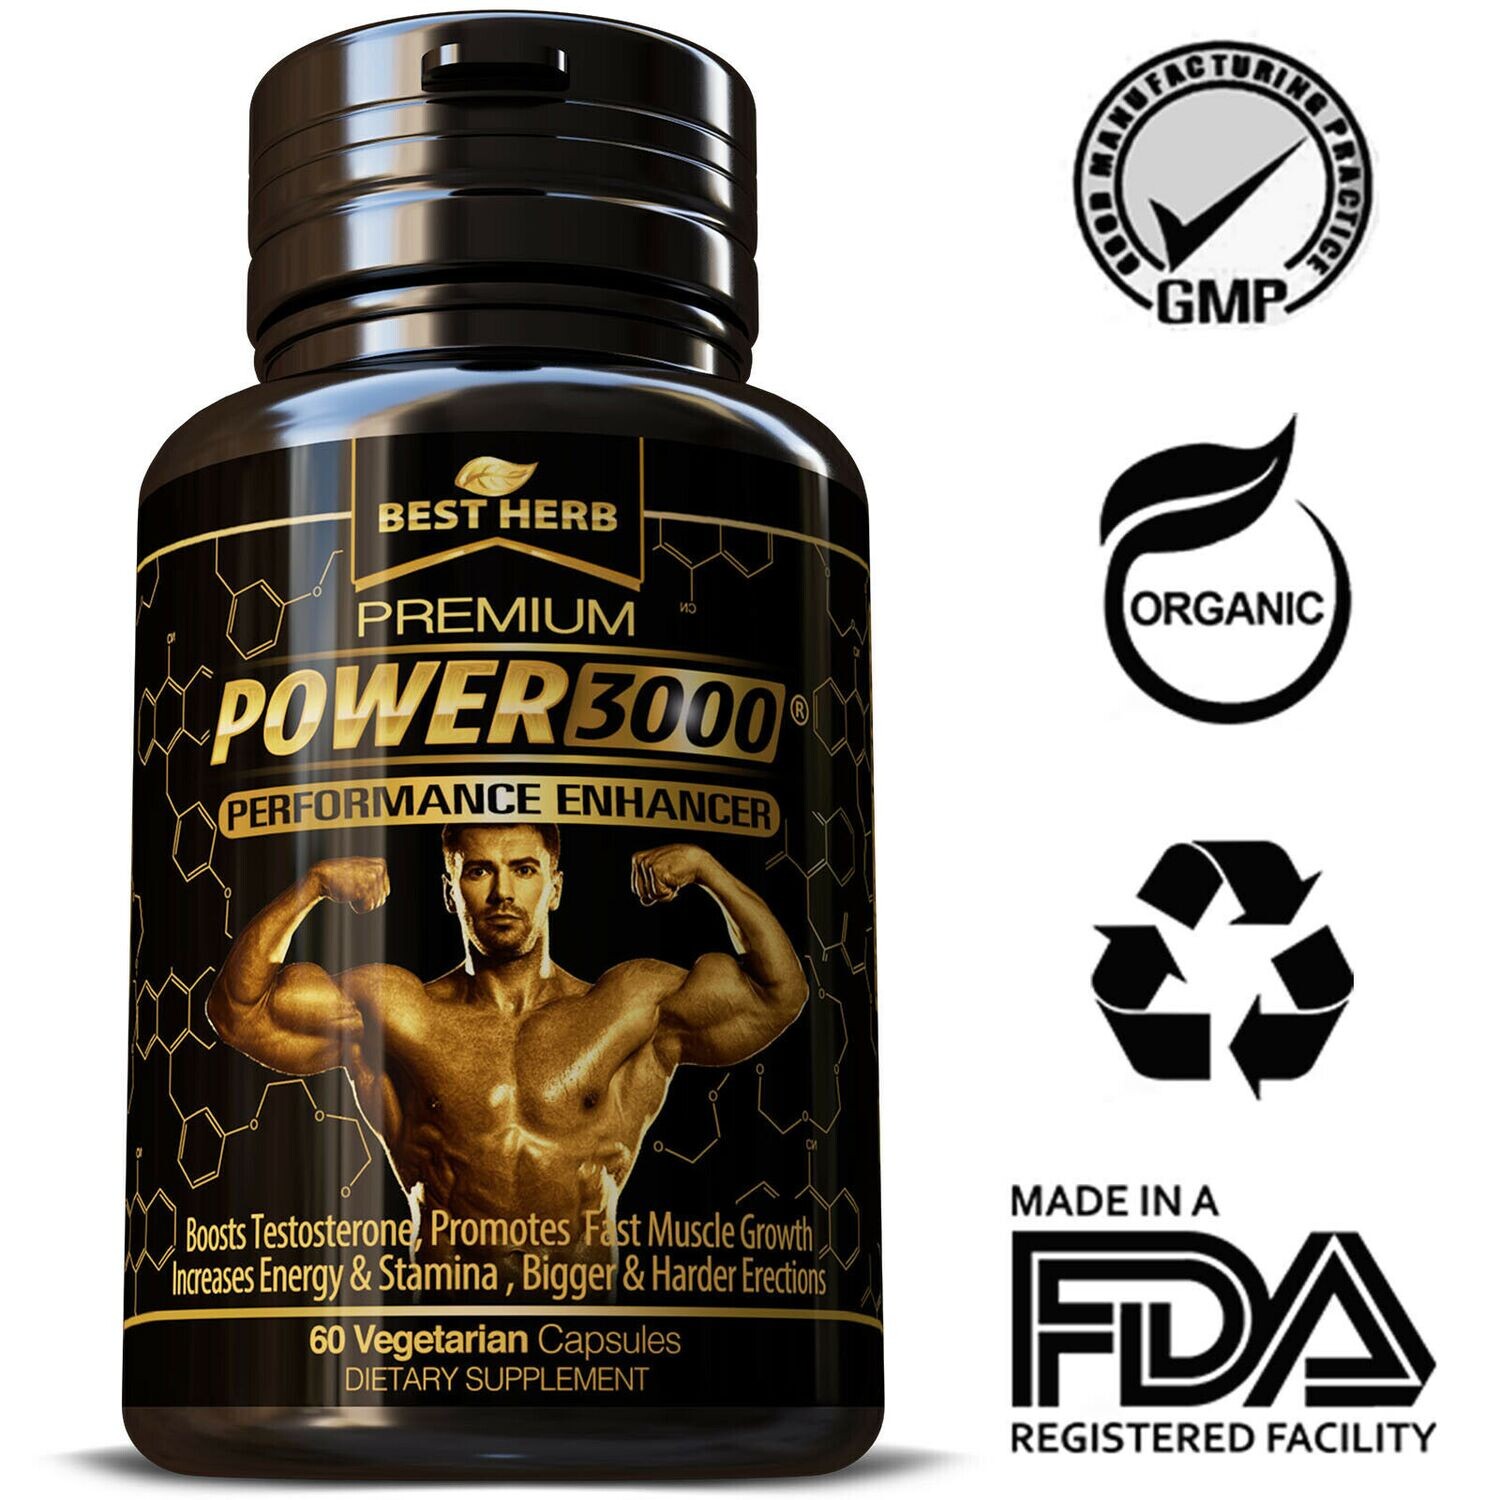 Best Save NZ HerbalsPower 300 Performance Enhancer Fast Muscle Growth Testosterone Booster 60 x Capsules